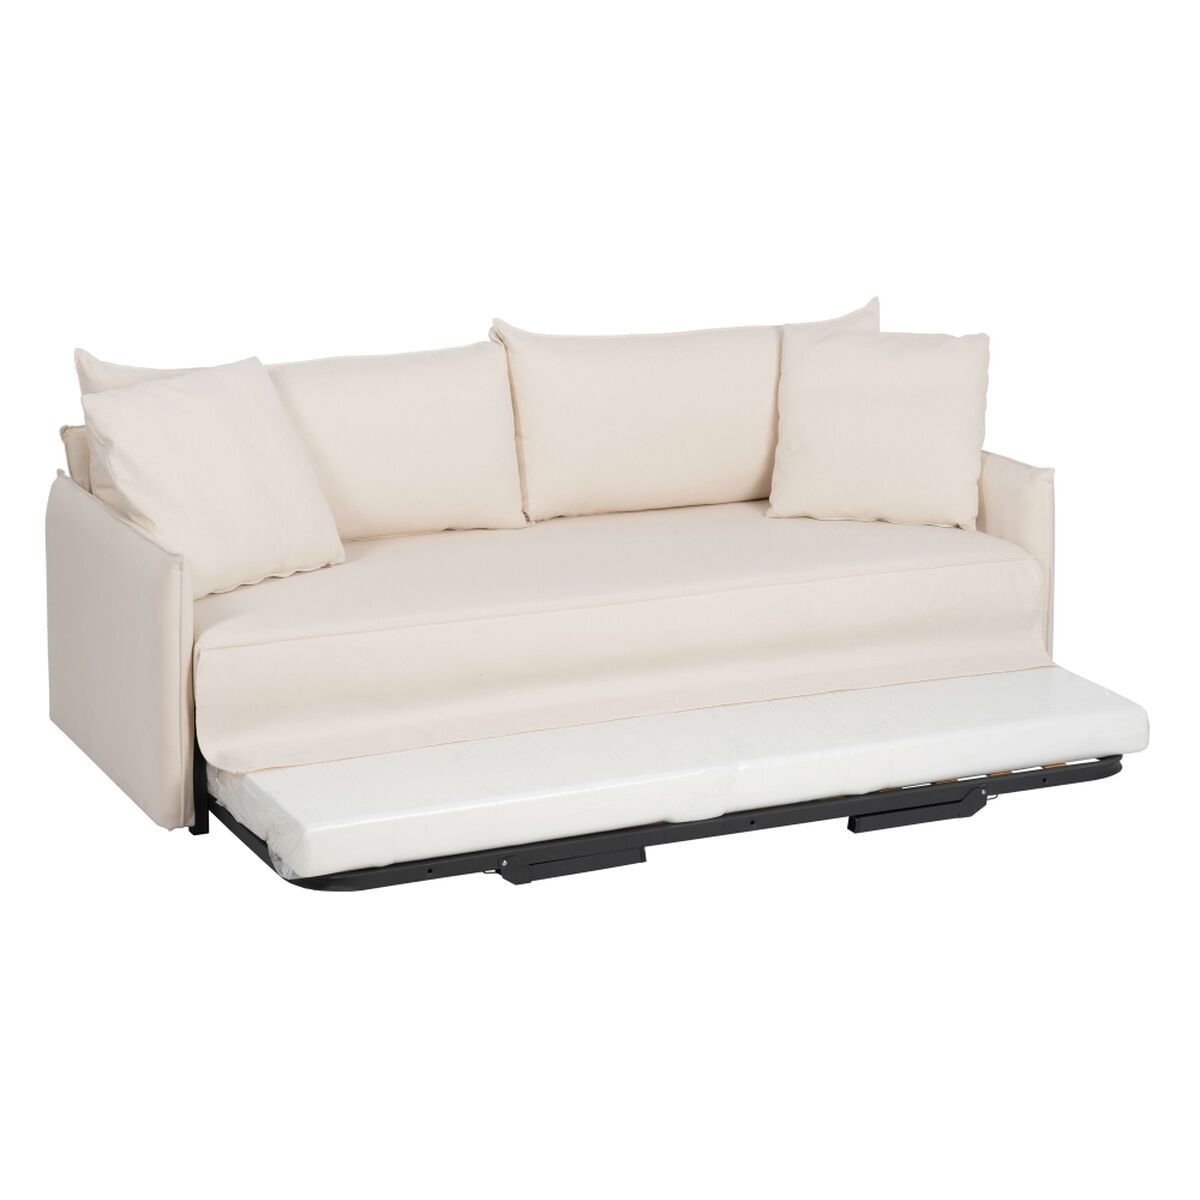 Sofabed 200 x 94 x 86 cm Synthetic Fabric Cream